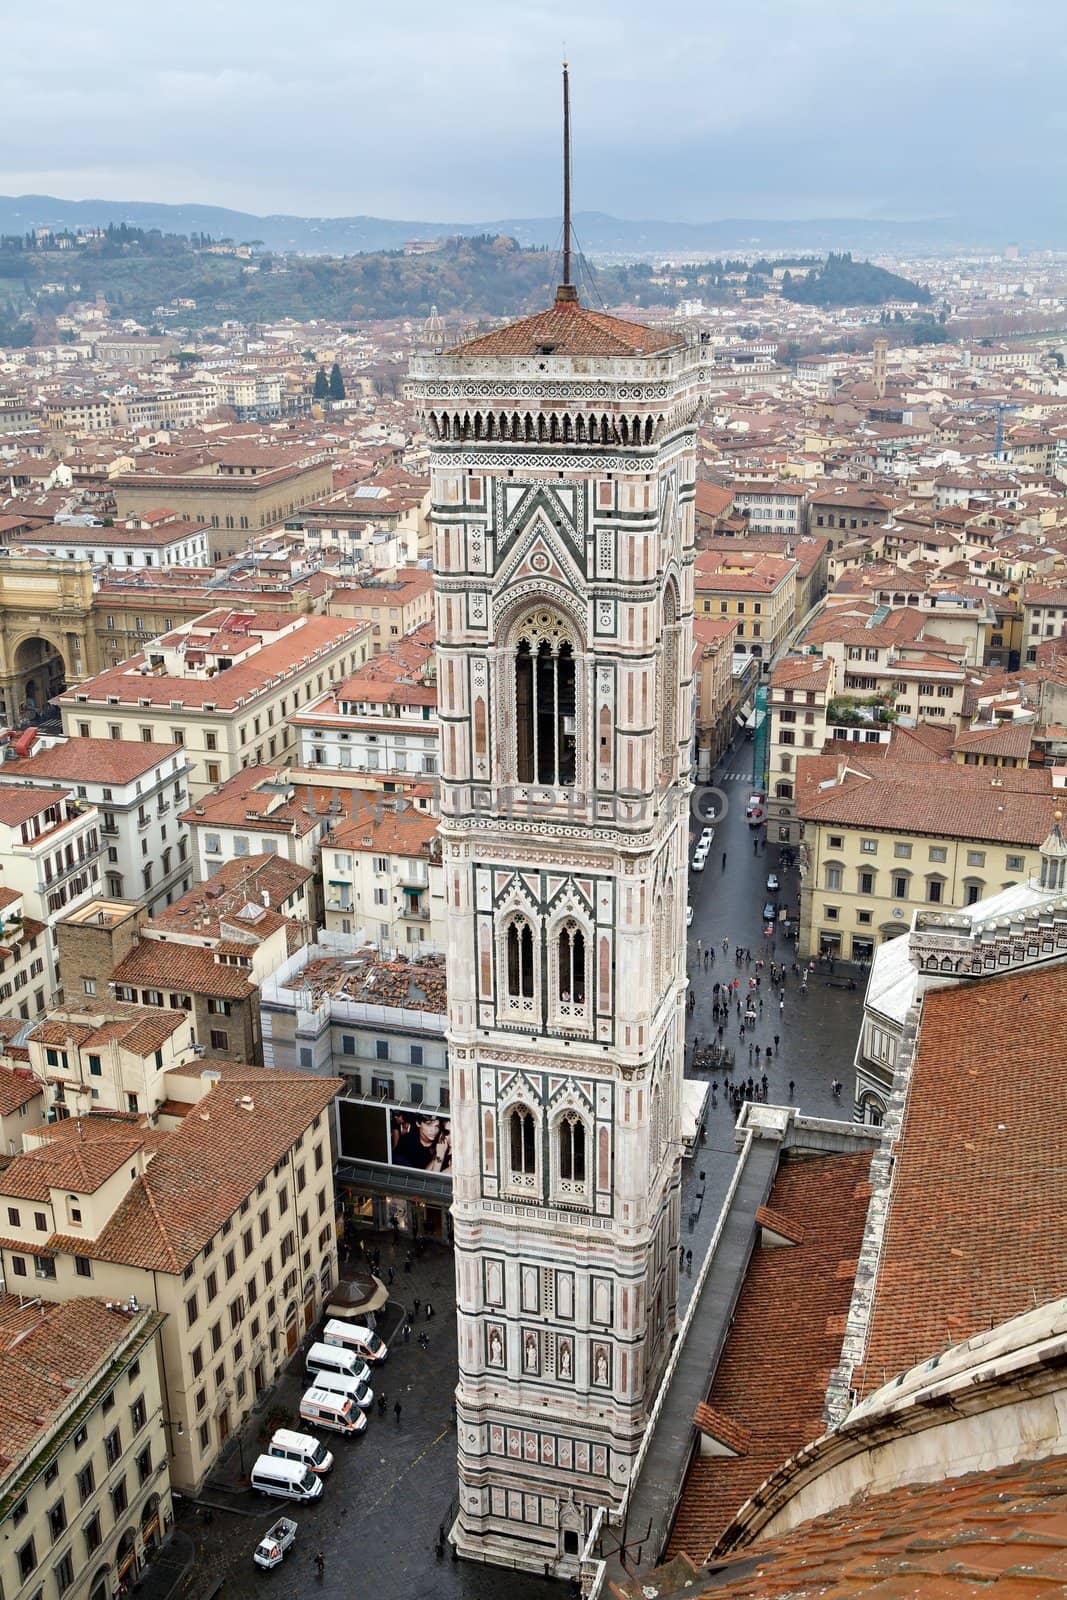 Florence, Italy: Giotto's Tower and Florence town view from the Cathedral Dome